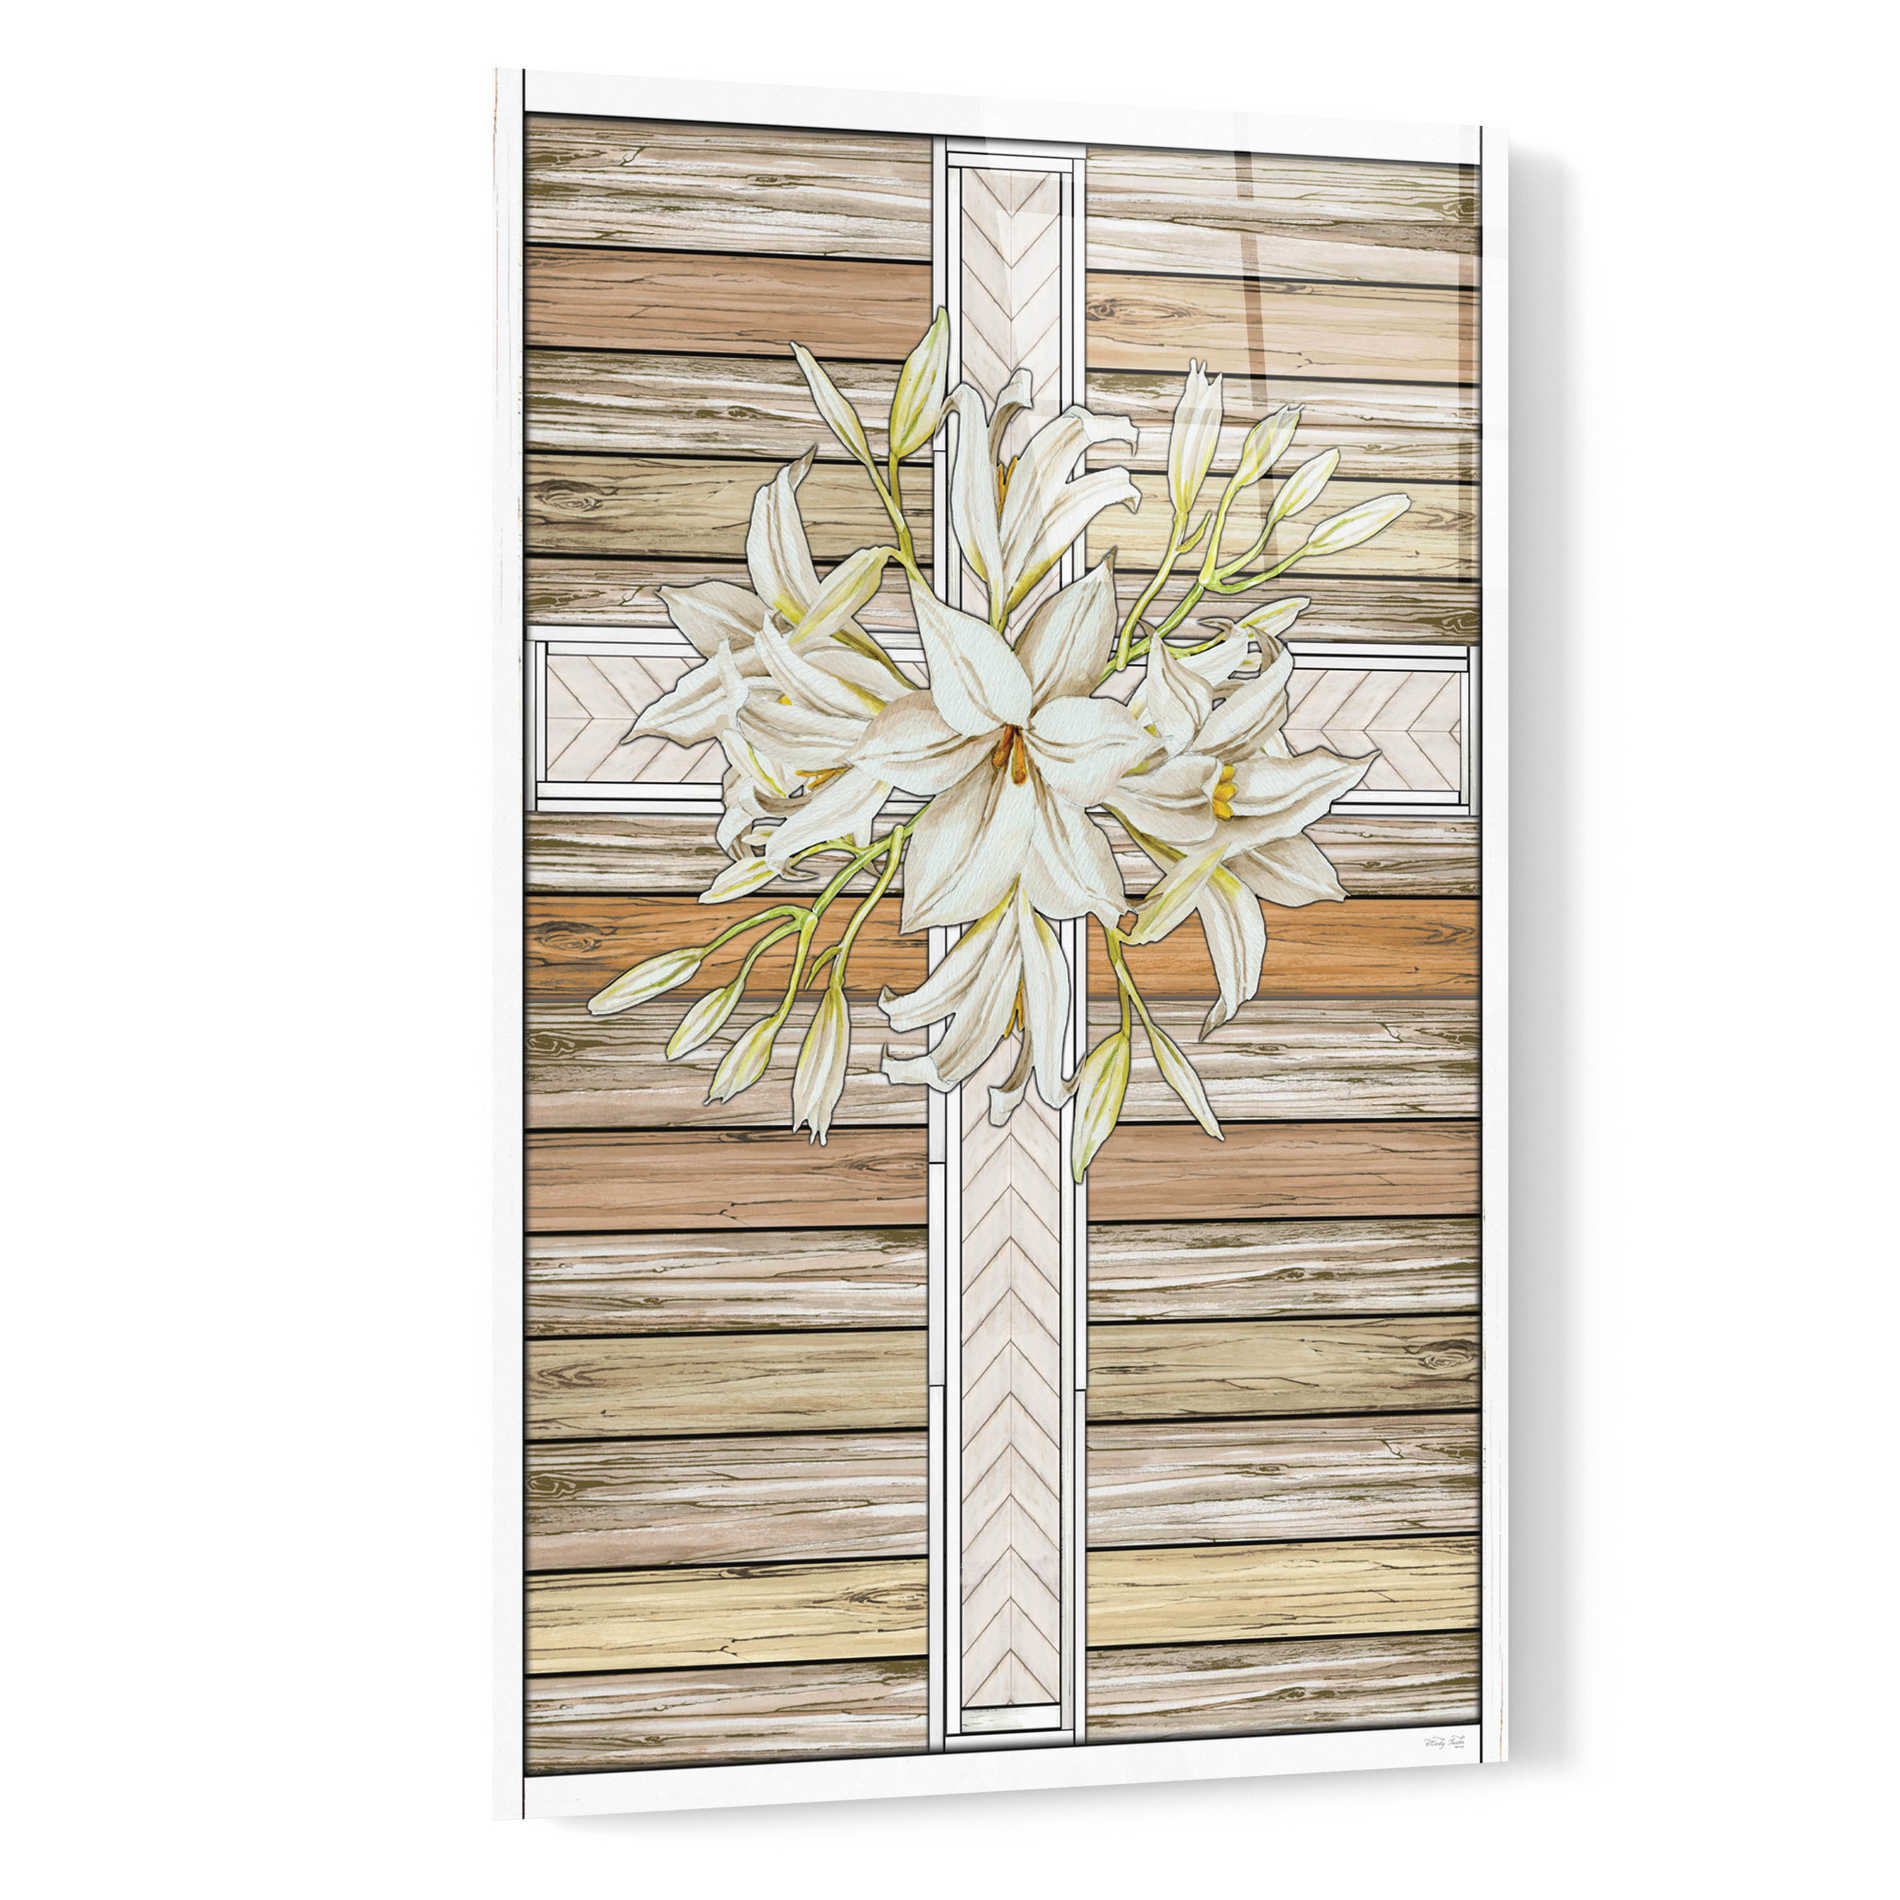 Epic Art 'Floral Cross' by Cindy Jacobs, Acrylic Glass Wall Art,16x24